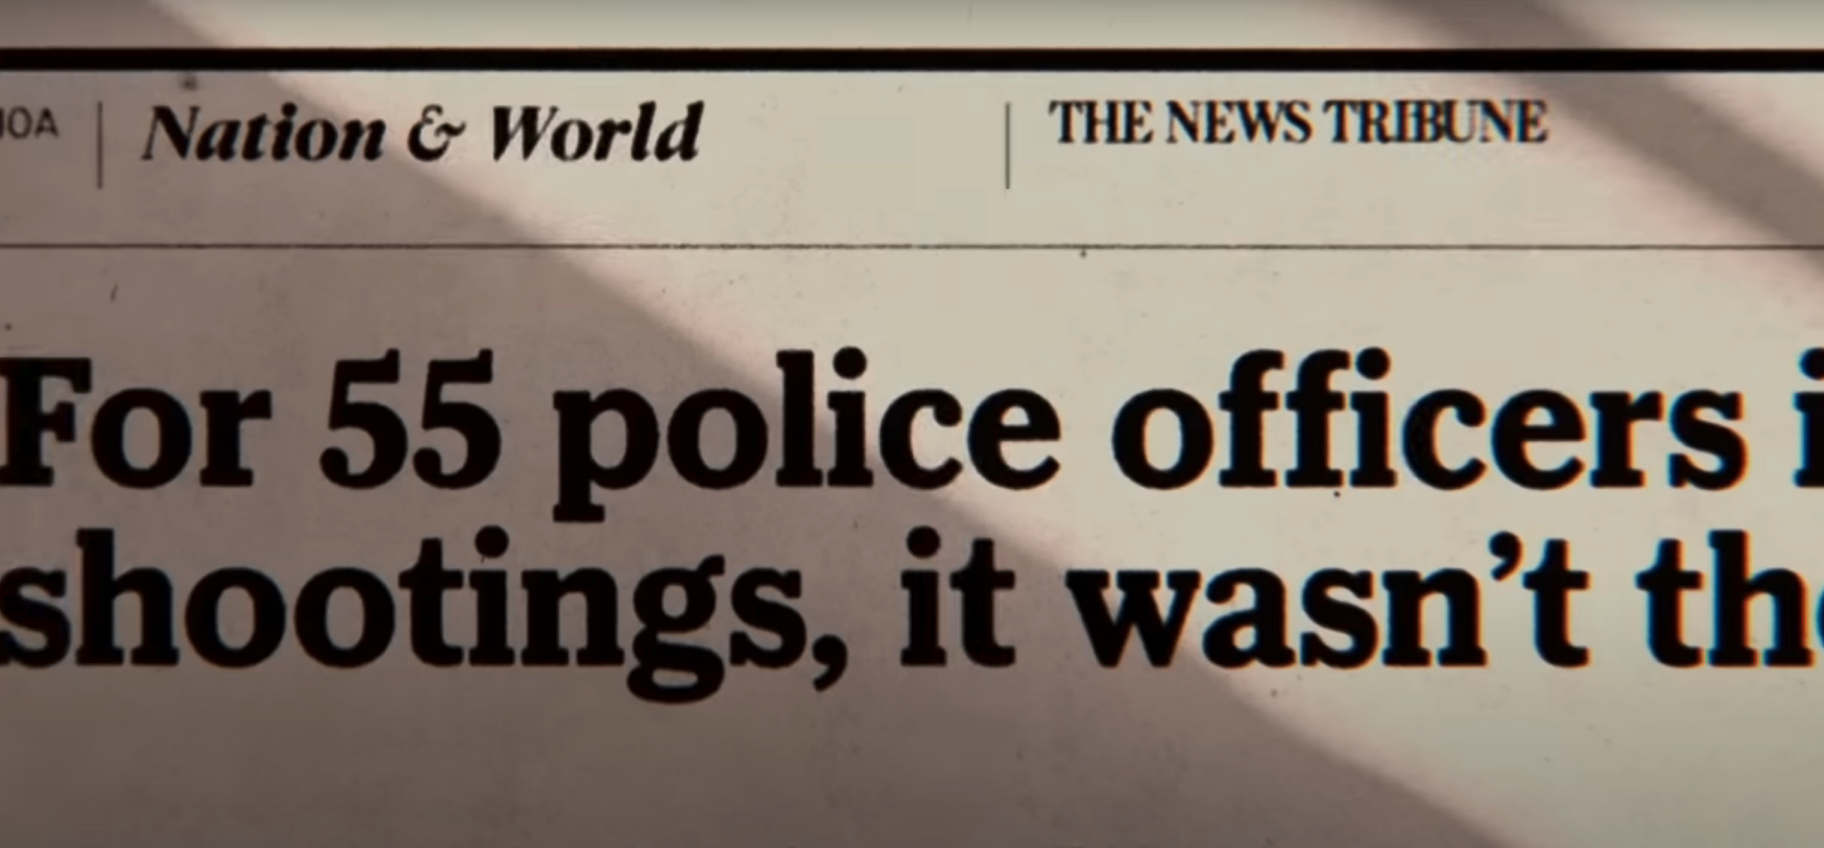 Cut off newspaper heading reads &quot;For 55 police officers... shootings, it wasn&#x27;t&quot;